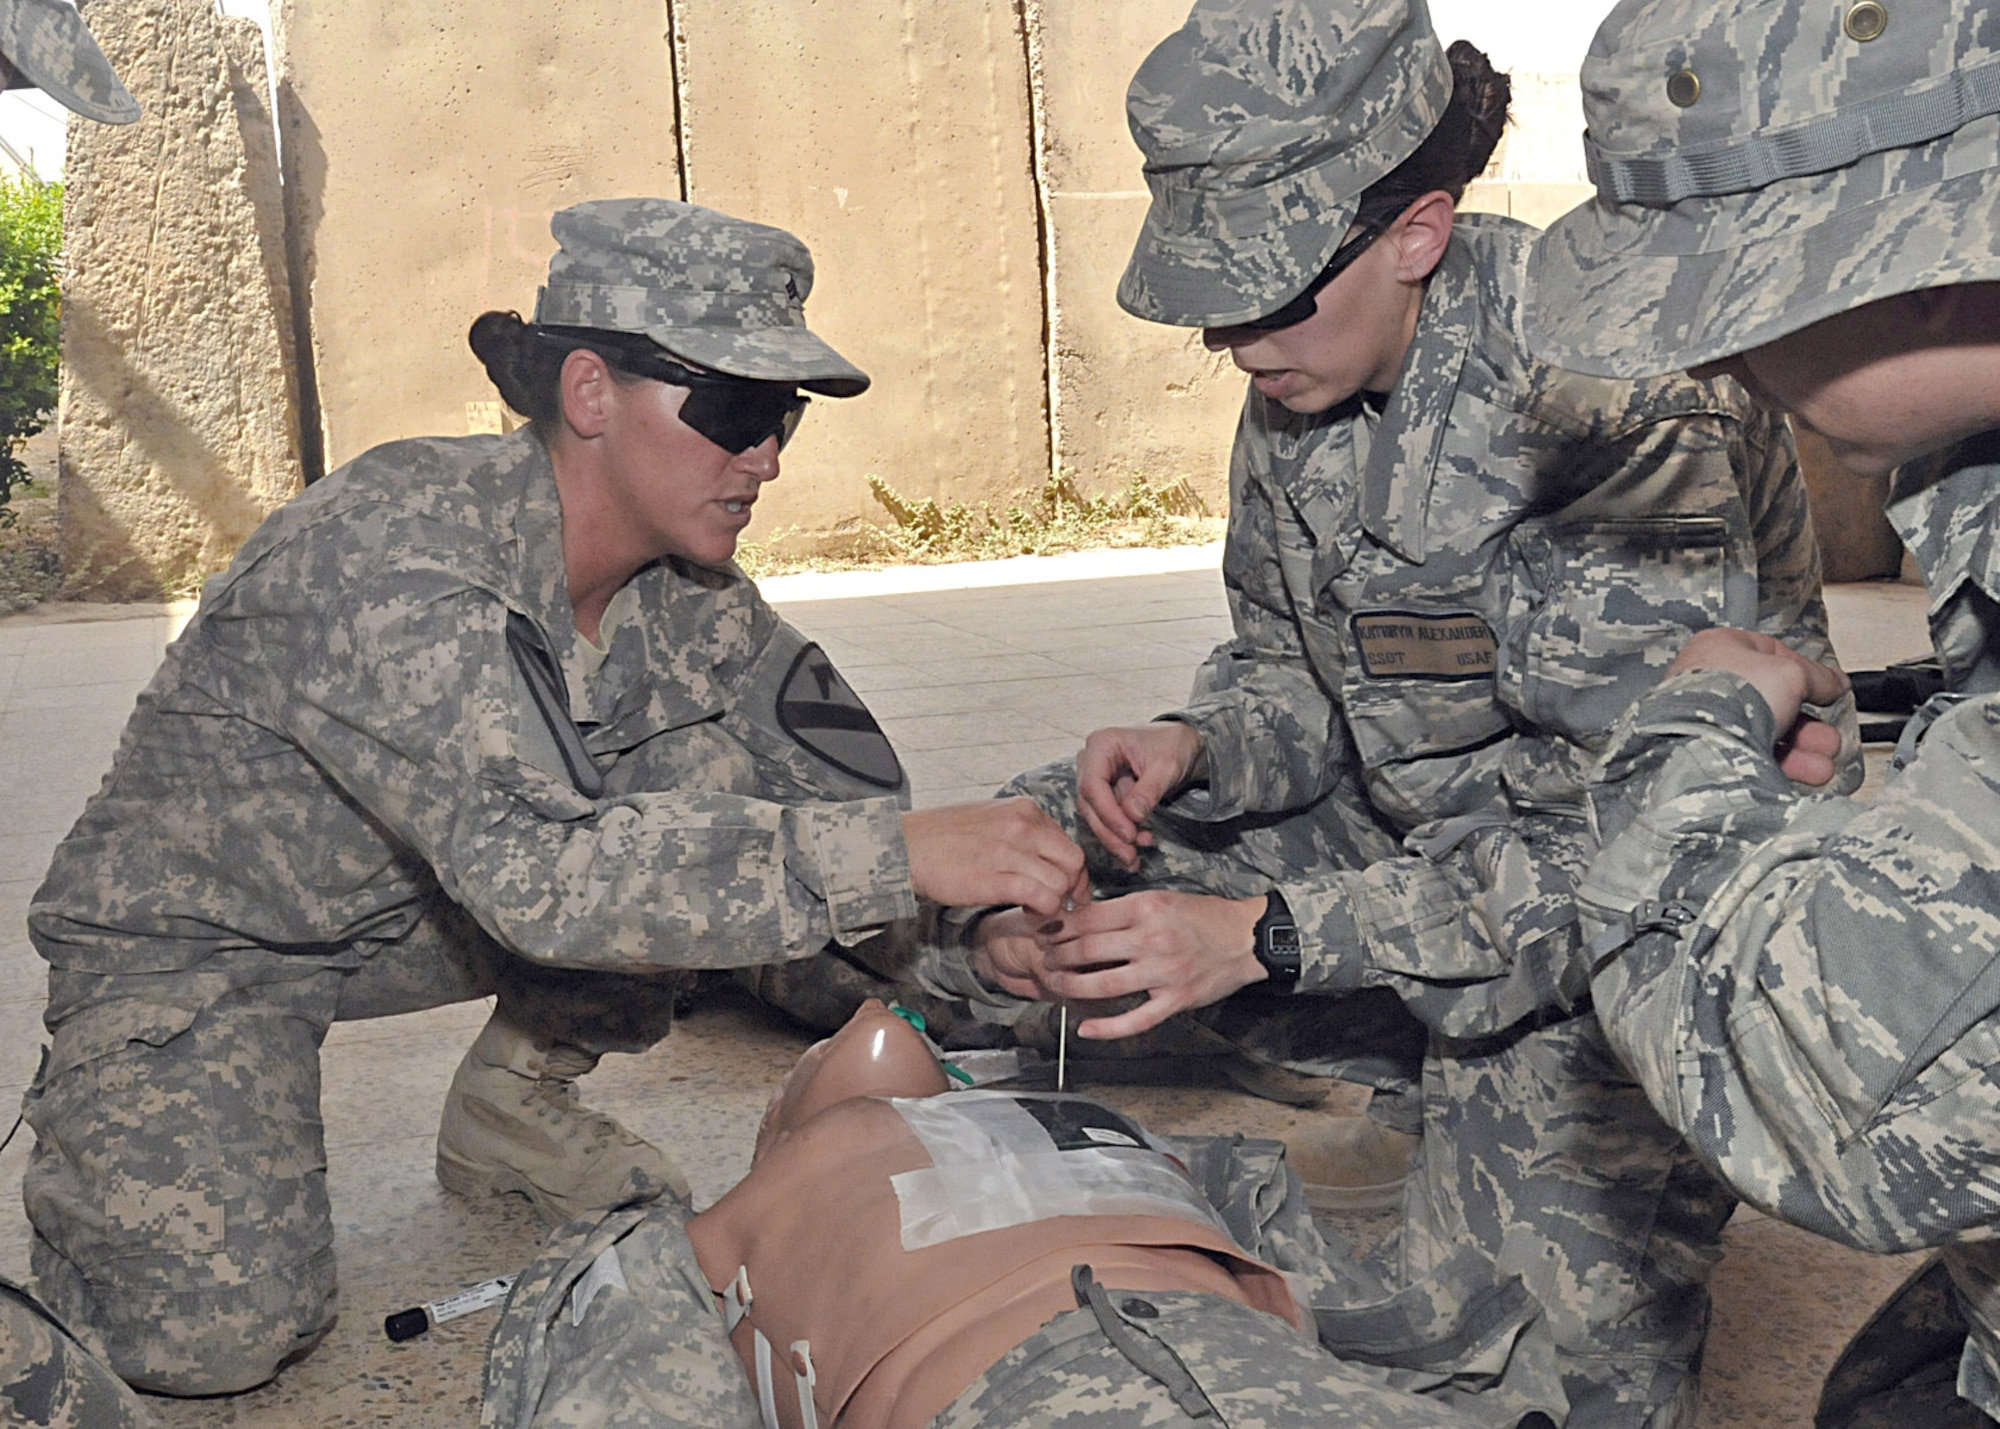 Using a medical mannequin, Army Sgt. Brenda Goode (left) shows Staff Sgt. Kathryn Alexander how to treat a chest wound during a tactical field care exercise, July 7, 2011, at Contingency Operating Site Marez, Iraq.  Goode, who served as one of the primary instructors for the five-day combat lifesaver course, is a combat medic assigned to Company C, 27th Brigade Support Battalion at COS Marez.  Alexander is a financial management specialist assigned to the Air Force Financial Management Detachment there. (U.S. Army photo/Spc. Terence Ewings)